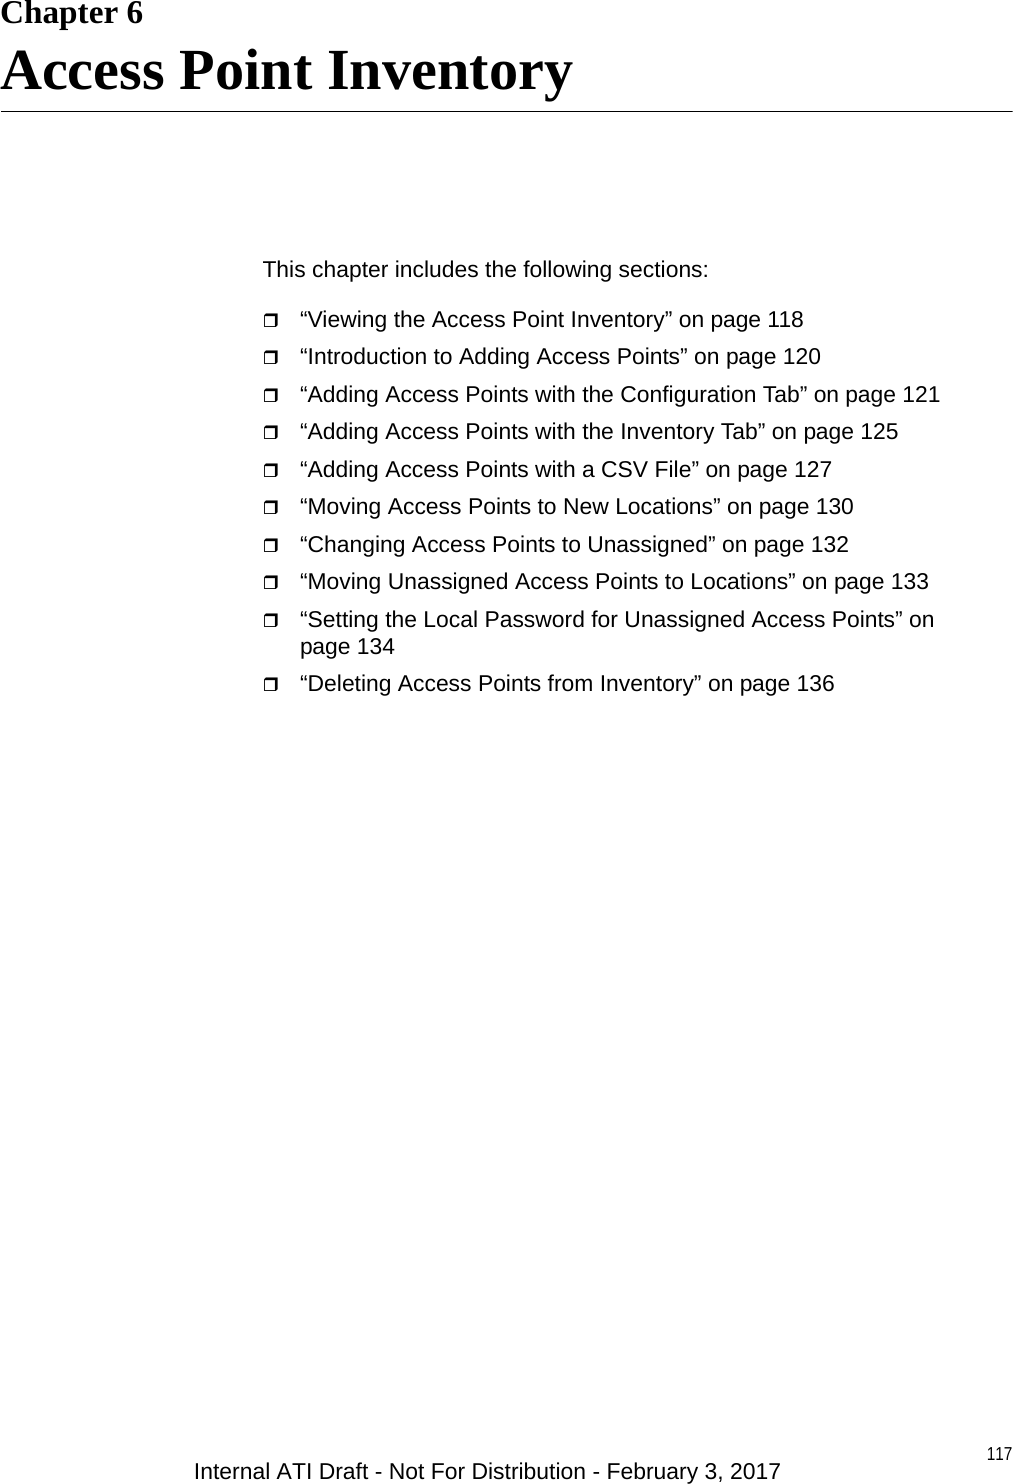 117Chapter 6Access Point InventoryThis chapter includes the following sections:“Viewing the Access Point Inventory” on page 118“Introduction to Adding Access Points” on page 120“Adding Access Points with the Configuration Tab” on page 121“Adding Access Points with the Inventory Tab” on page 125“Adding Access Points with a CSV File” on page 127“Moving Access Points to New Locations” on page 130“Changing Access Points to Unassigned” on page 132“Moving Unassigned Access Points to Locations” on page 133“Setting the Local Password for Unassigned Access Points” on page 134“Deleting Access Points from Inventory” on page 136Internal ATI Draft - Not For Distribution - February 3, 2017